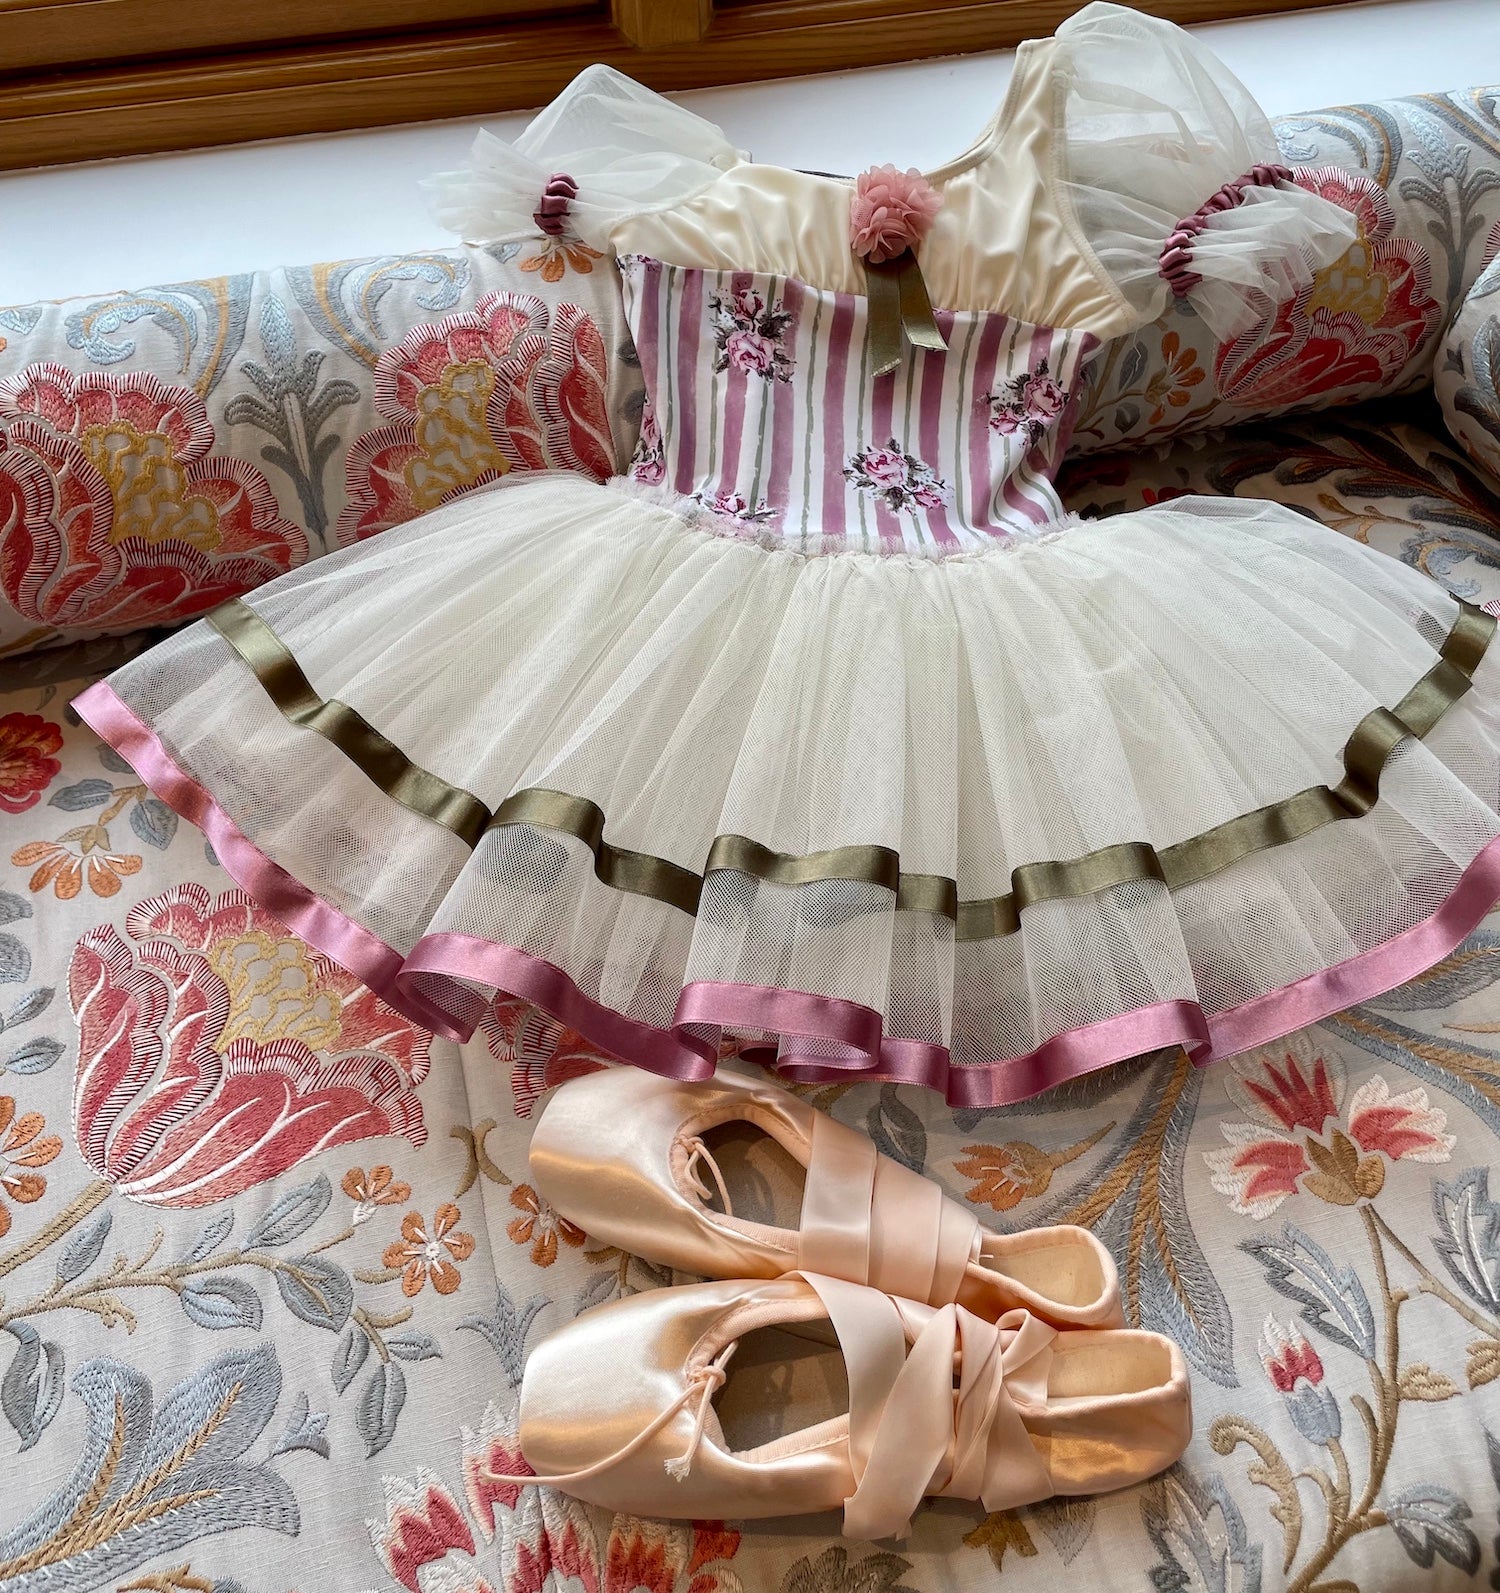 Party planning for children ballerina ballet pink birthday tea party inspiration ideas Charlotte sy Dimby